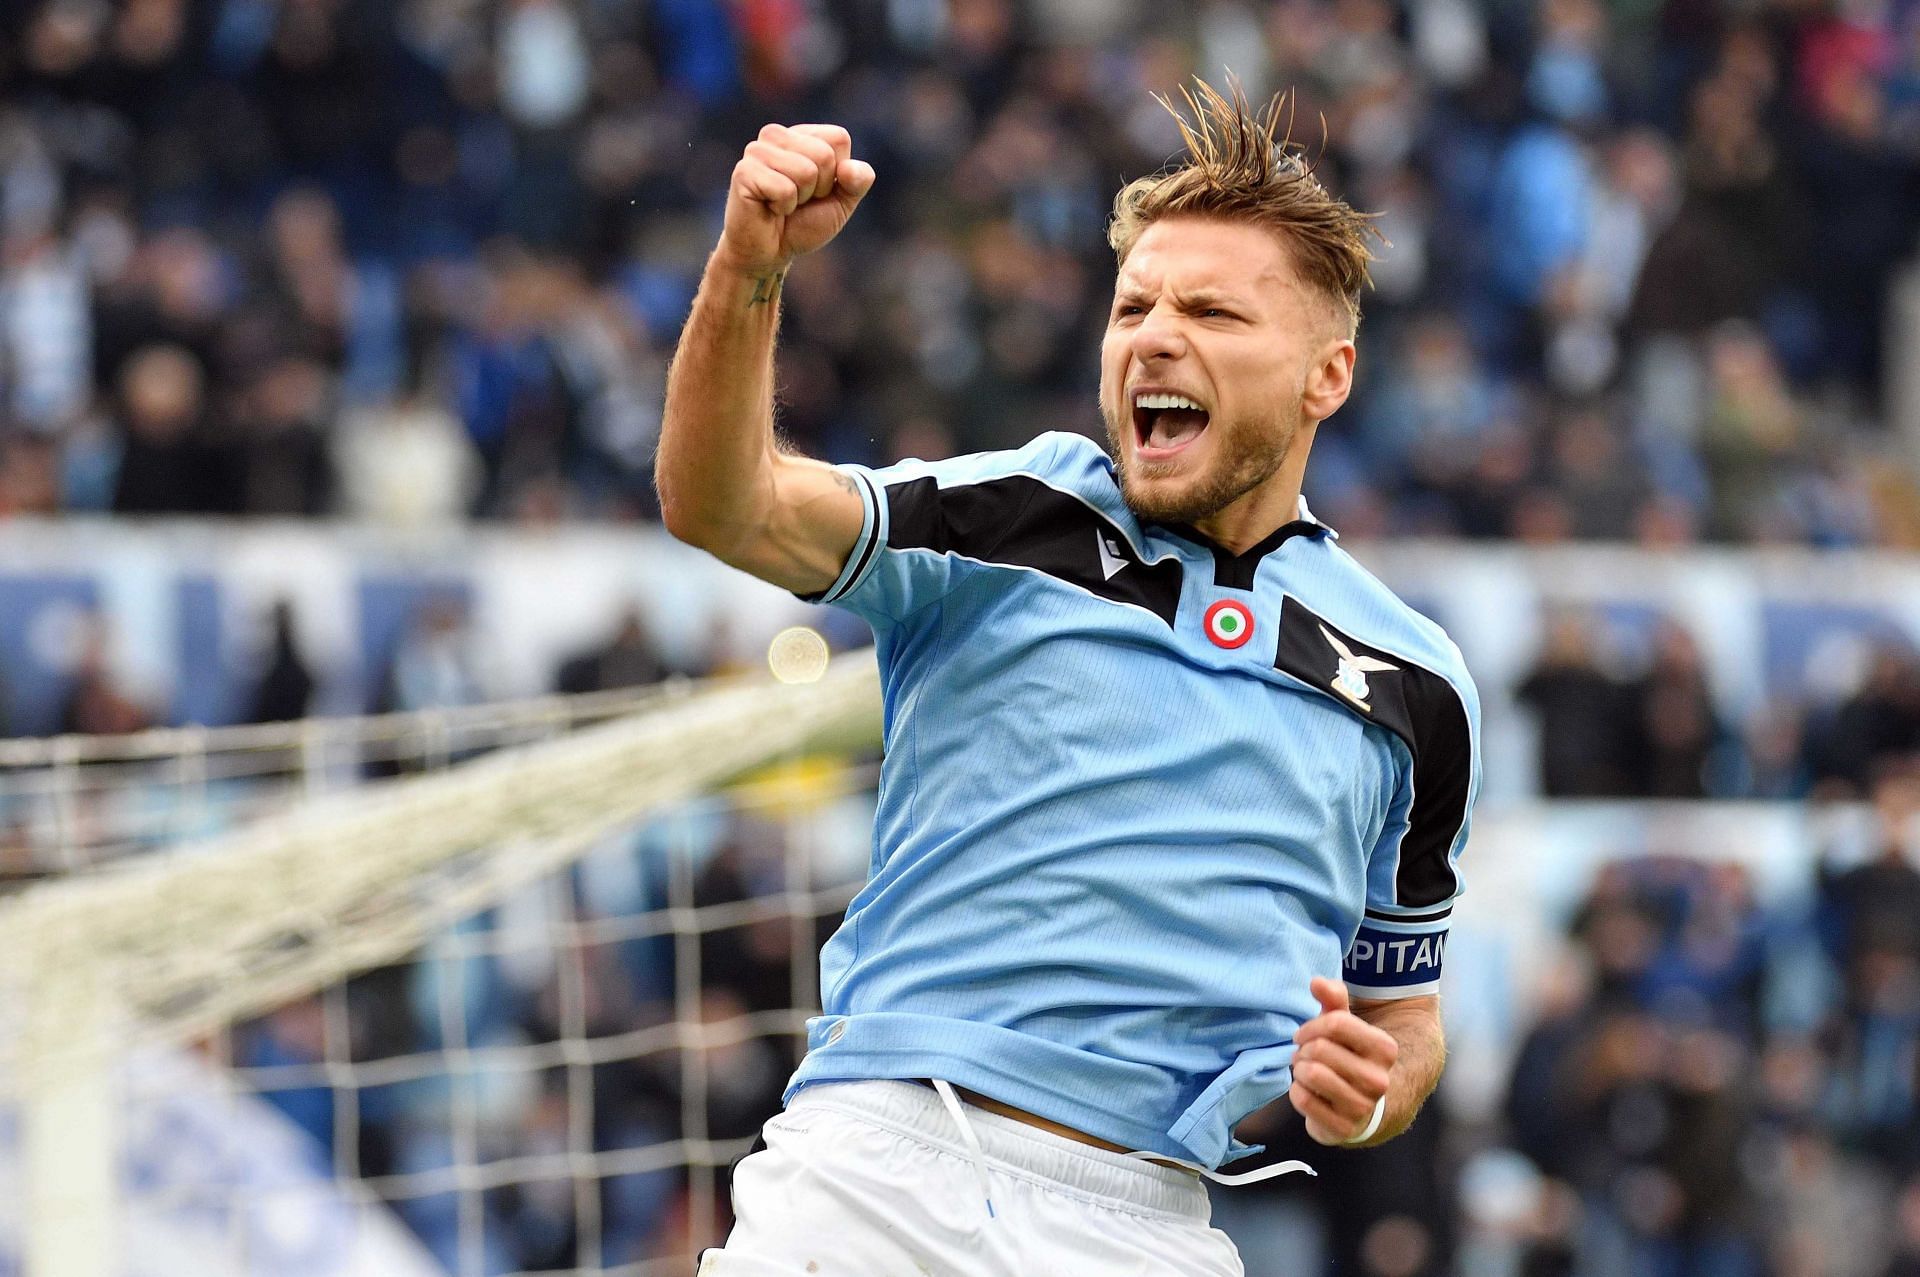 Immobile has rediscovered his goalscoring form with Lazio